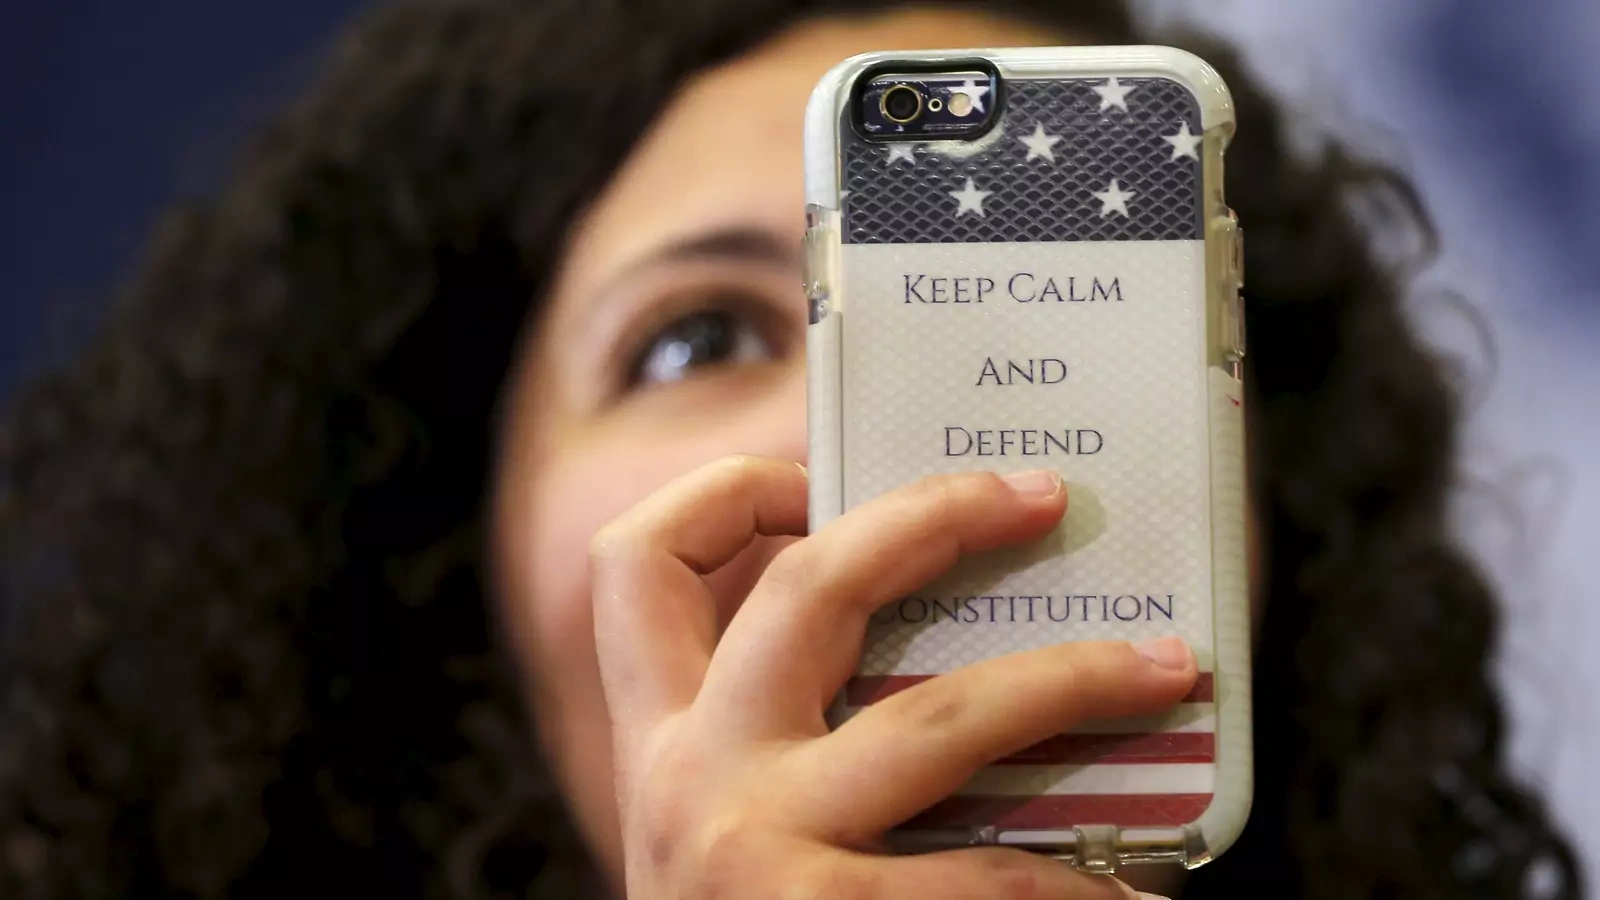 An audience member holds up a phone with a case reading "Keep Calm and Defend the Constitution" during a "Get Out to Caucus" rally with U.S. Democratic presidential candidate Hillary Clinton in Cedar Rapids